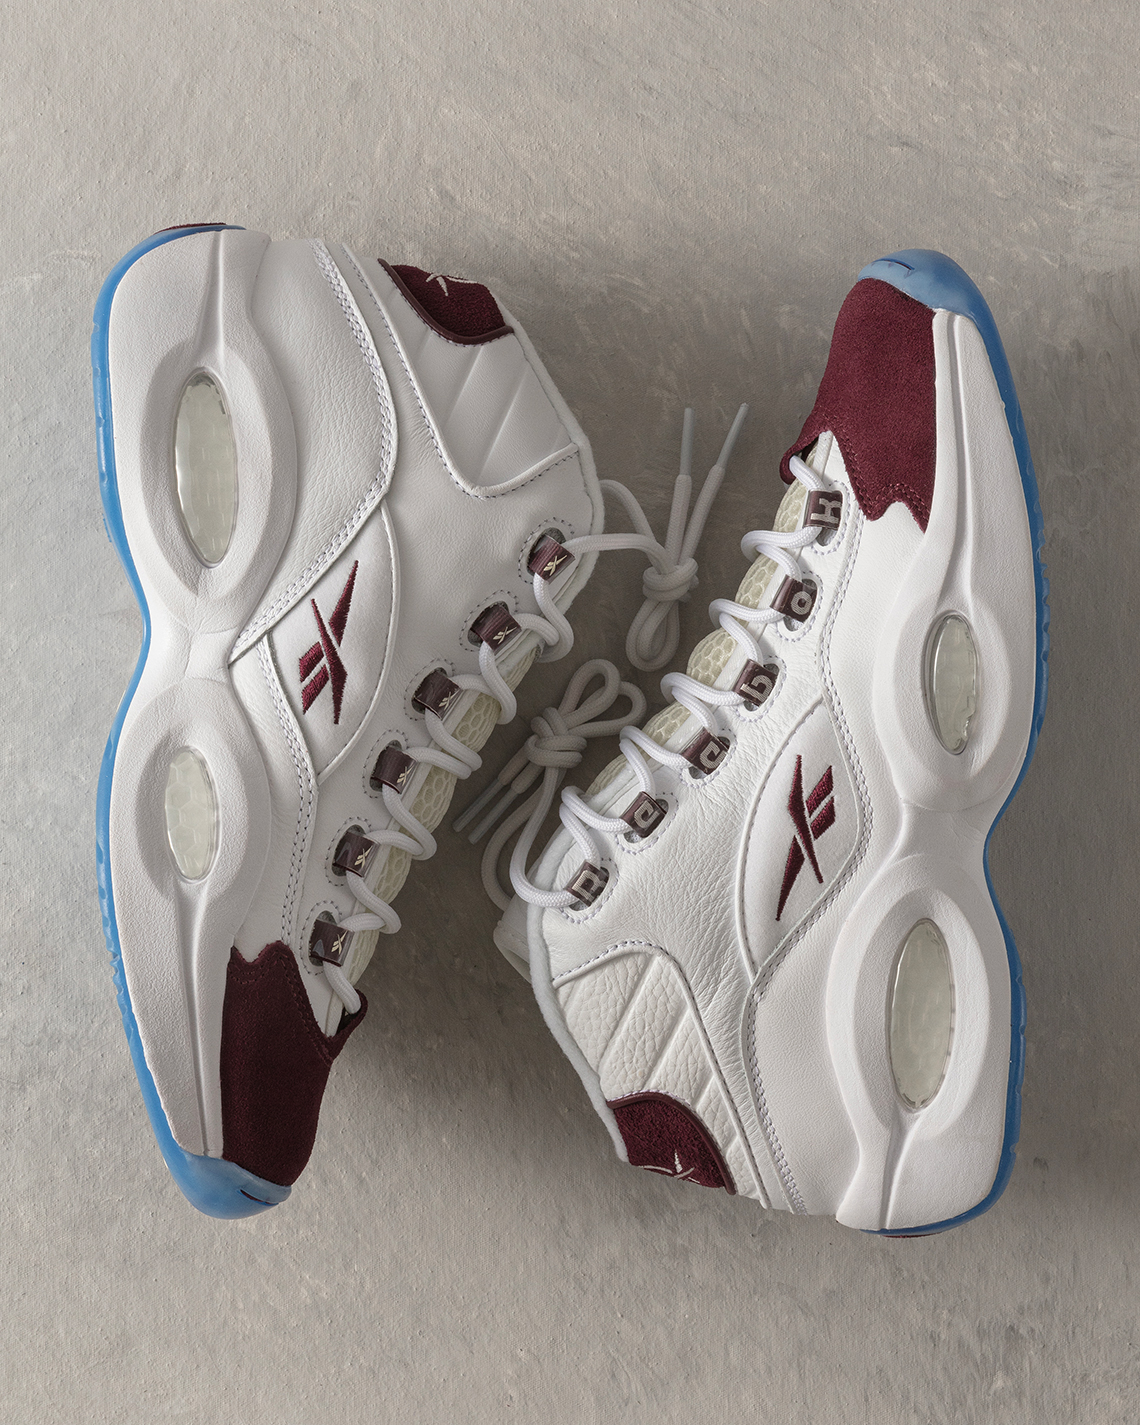 Packer brand new with original box Reebok Royal Glide Ripple Clip CM9099 Burgundy Suede Release Date 9